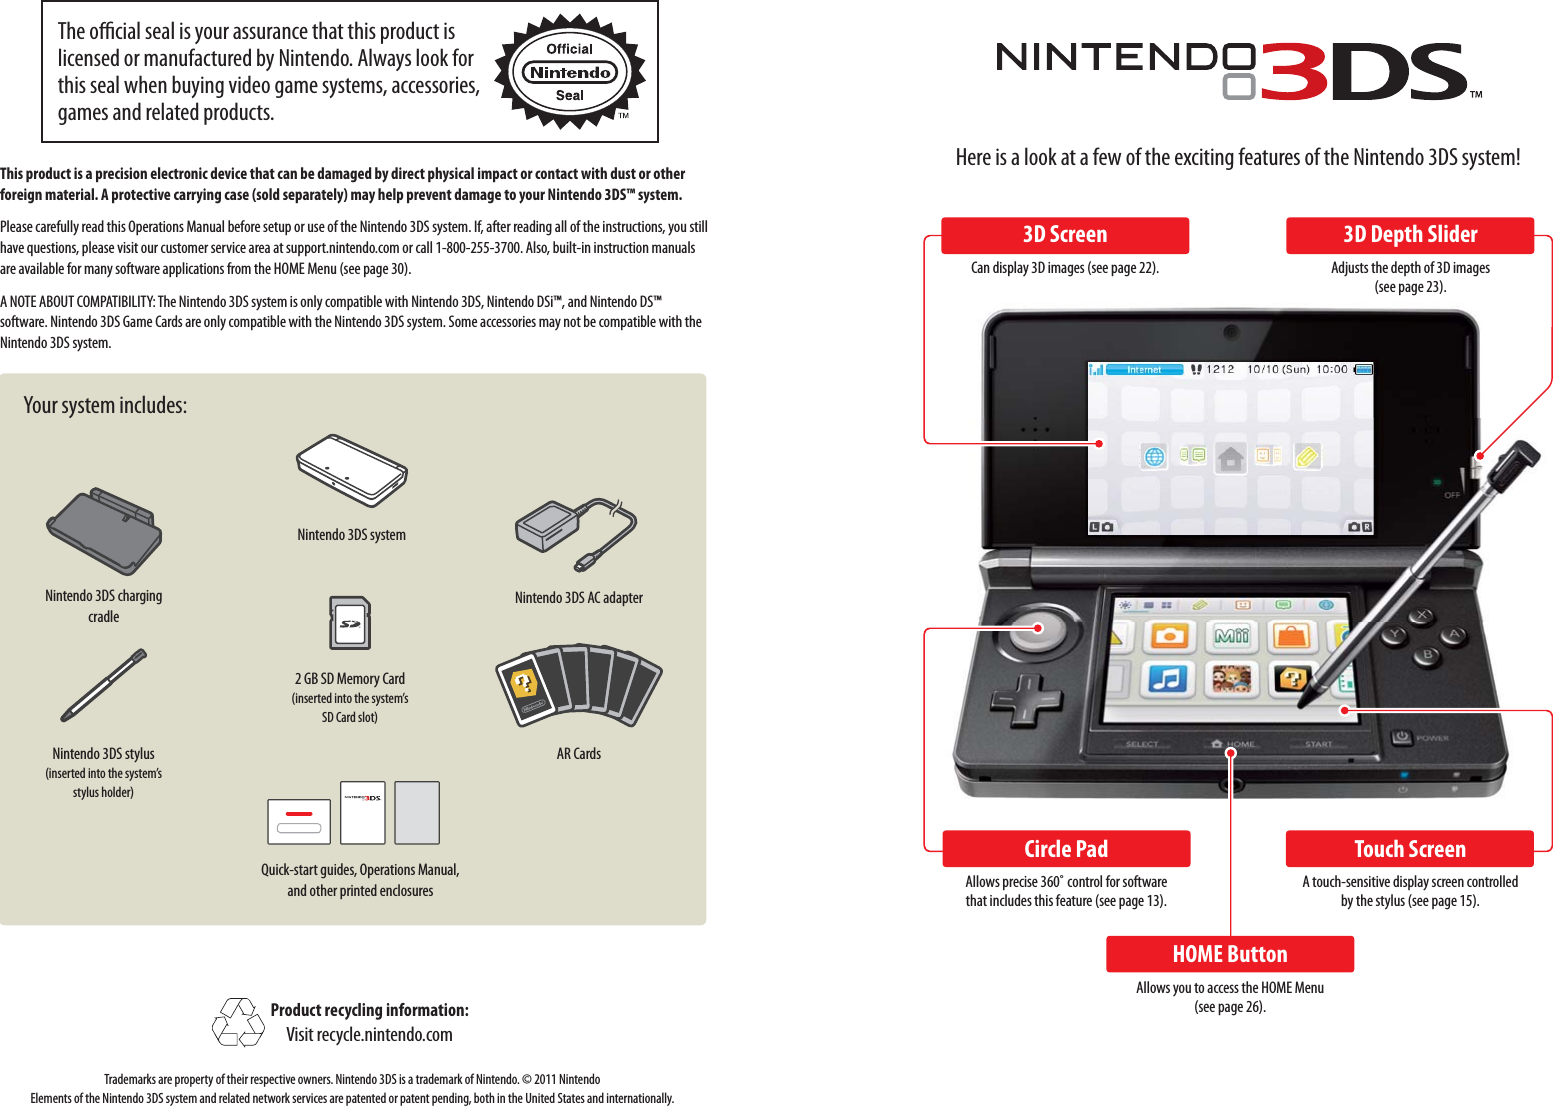 Nintendo 3DS systemNintendo 3DS stylus(inserted into the system’s stylus holder)2 GB SD Memory Card(inserted into the system’s SD Card slot)Quick-start guides, Operations Manual, and other printed enclosuresNintendo 3DS AC adapterAR CardsNintendo 3DS charging cradleHere is a look at a few of the exciting features of the Nintendo 3DS system!3D ScreenCan display 3D images (see page 22).Circle PadAllows precise 360˚ control for software that includes this feature (see page 13).HOME ButtonAllows you to access the HOME Menu (see page 26).Touch ScreenA touch-sensitive display screen controlled by the stylus (see page 15).3D Depth SliderAdjusts the depth of 3D images (see page 23).This product is a precision electronic device that can be damaged by direct physical impact or contact with dust or other foreign material. A protective carrying case (sold separately) may help prevent damage to your Nintendo 3DS™ system.Please carefully read this Operations Manual before setup or use of the Nintendo 3DS system. If, after reading all of the instructions, you still have questions, please visit our customer service area at support.nintendo.com or call 1-800-255-3700. Also, built-in instruction manuals are available for many software applications from the HOME Menu (see page 30).A NOTE ABOUT COMPATIBILITY: The Nintendo 3DS system is only compatible with Nintendo 3DS, Nintendo DSi™, and Nintendo DS™ software. Nintendo 3DS Game Cards are only compatible with the Nintendo 3DS system. Some accessories may not be compatible with the Nintendo 3DS system.Your system includes:Product recycling information:Visit recycle.nintendo.comTrademarks are property of their respective owners. Nintendo 3DS is a trademark of Nintendo. © 2011 Nintendo Elements of the Nintendo 3DS system and related network services are patented or patent pending, both in the United States and internationally.The ocial seal is your assurance that this product is licensed or manufactured by Nintendo. Always look for this seal when buying video game systems, accessories, games and related products.